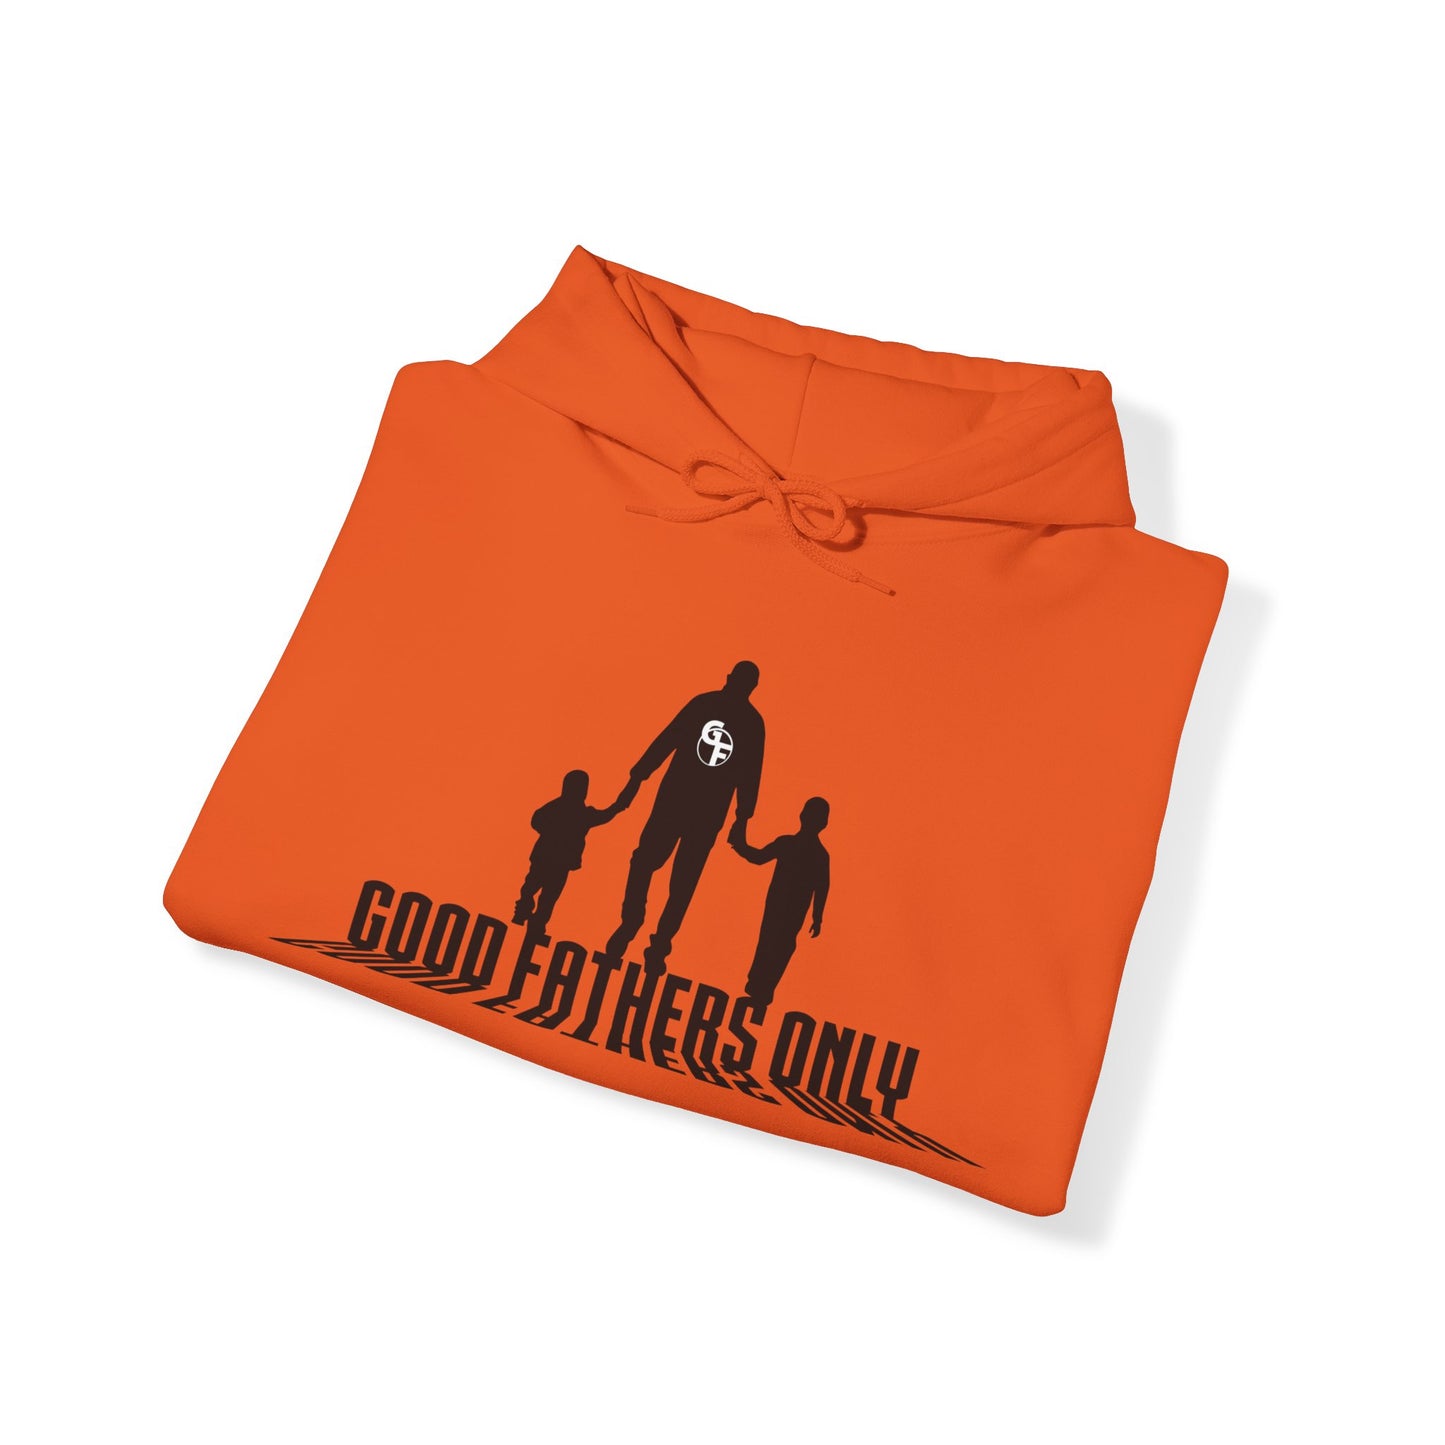 Good Fathers Only Hoodie